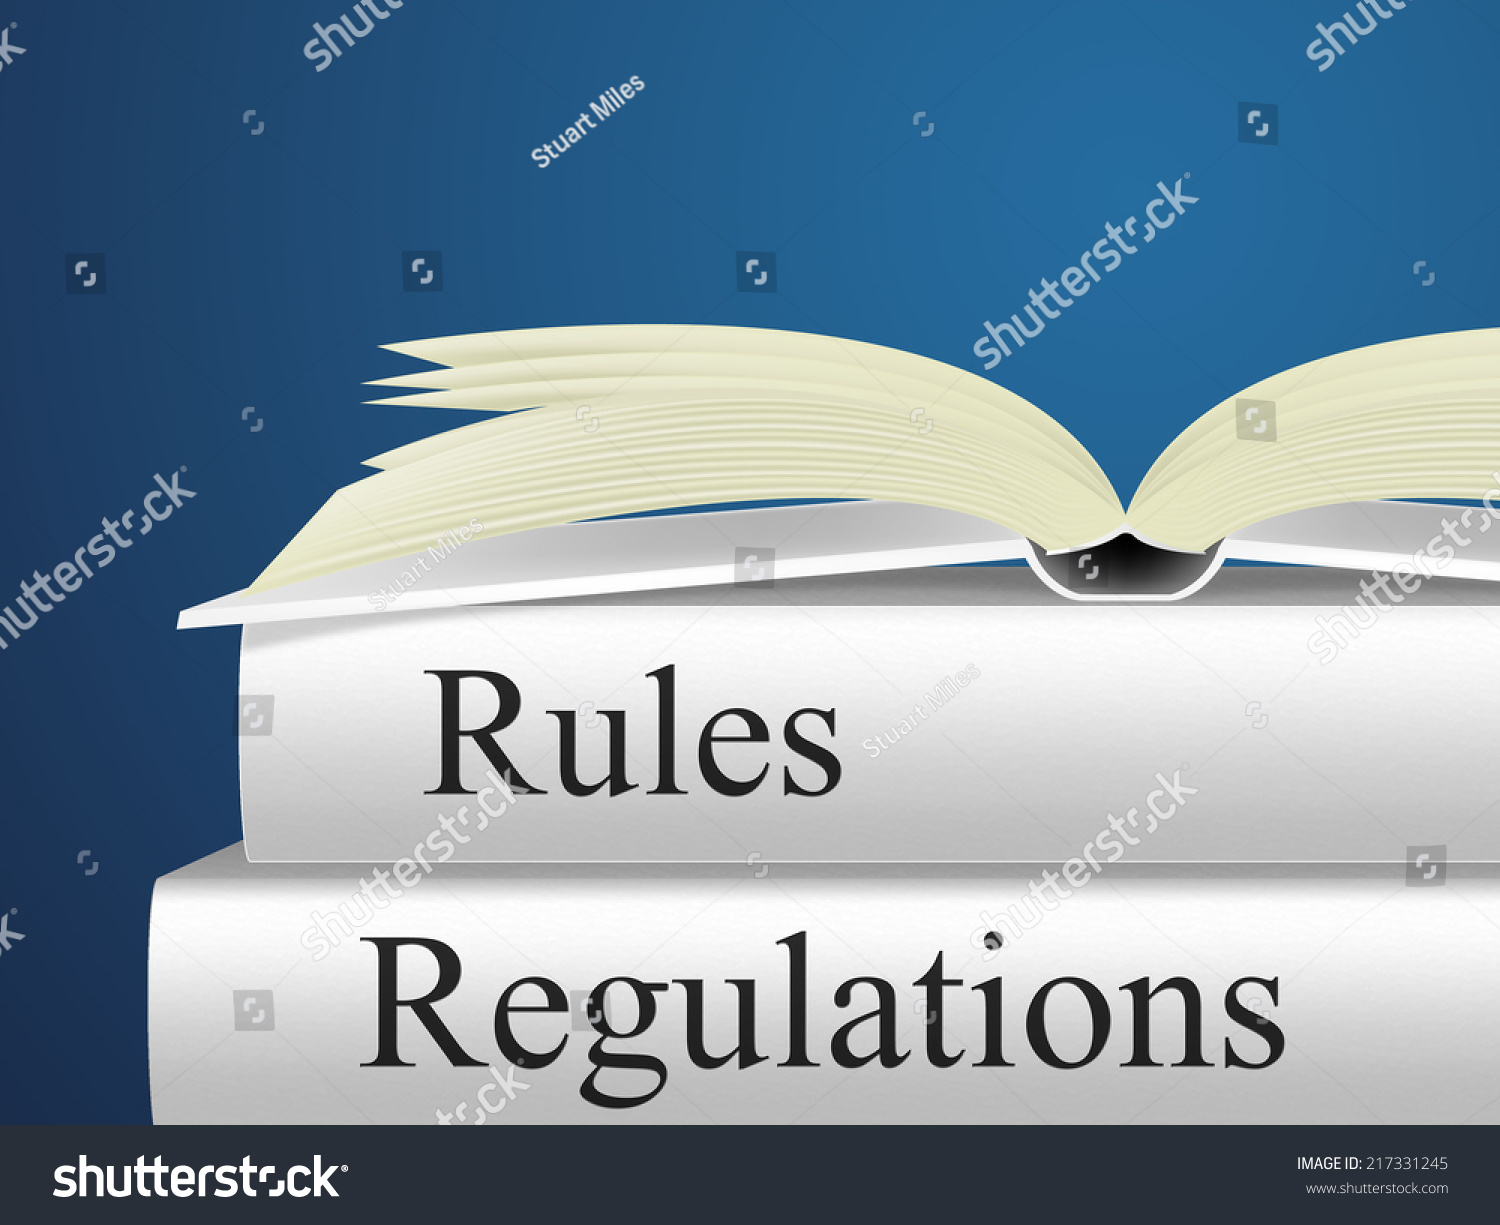 Rules Regulations Meaning Protocol Guideline Procedures Stock Illustration 217331245